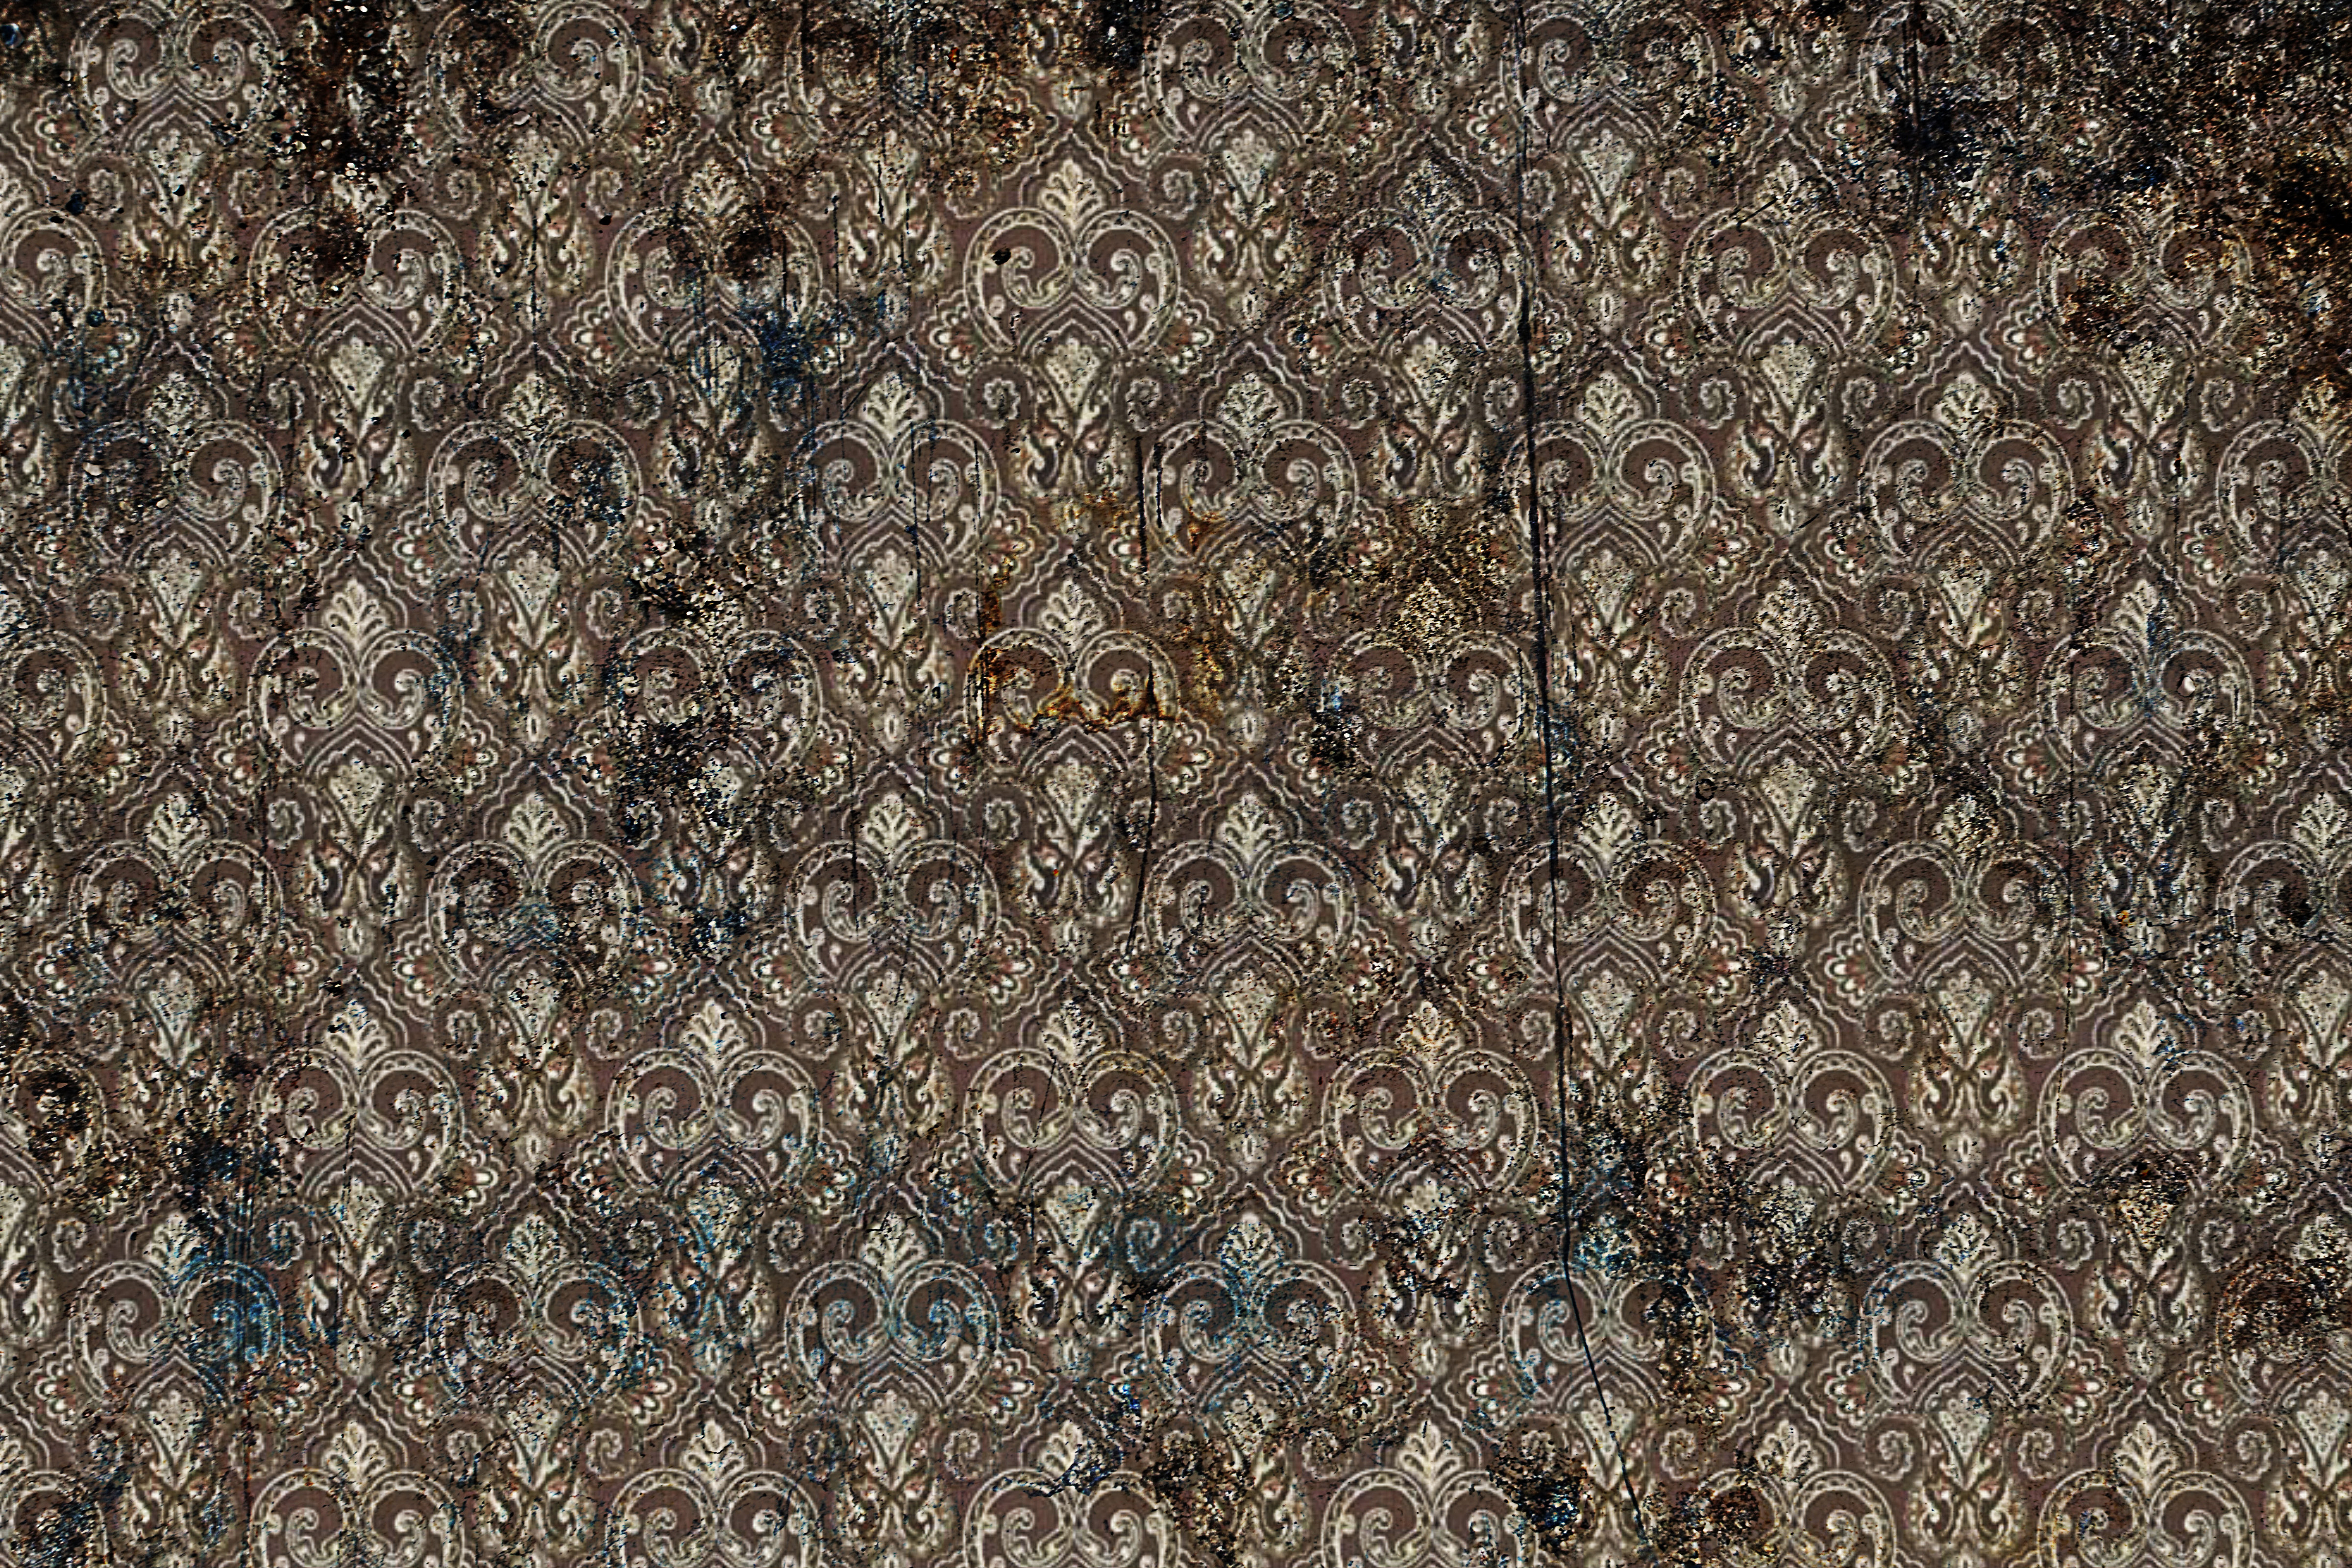 High Resolution Grungy French Wallpaper Textures Using Patterns